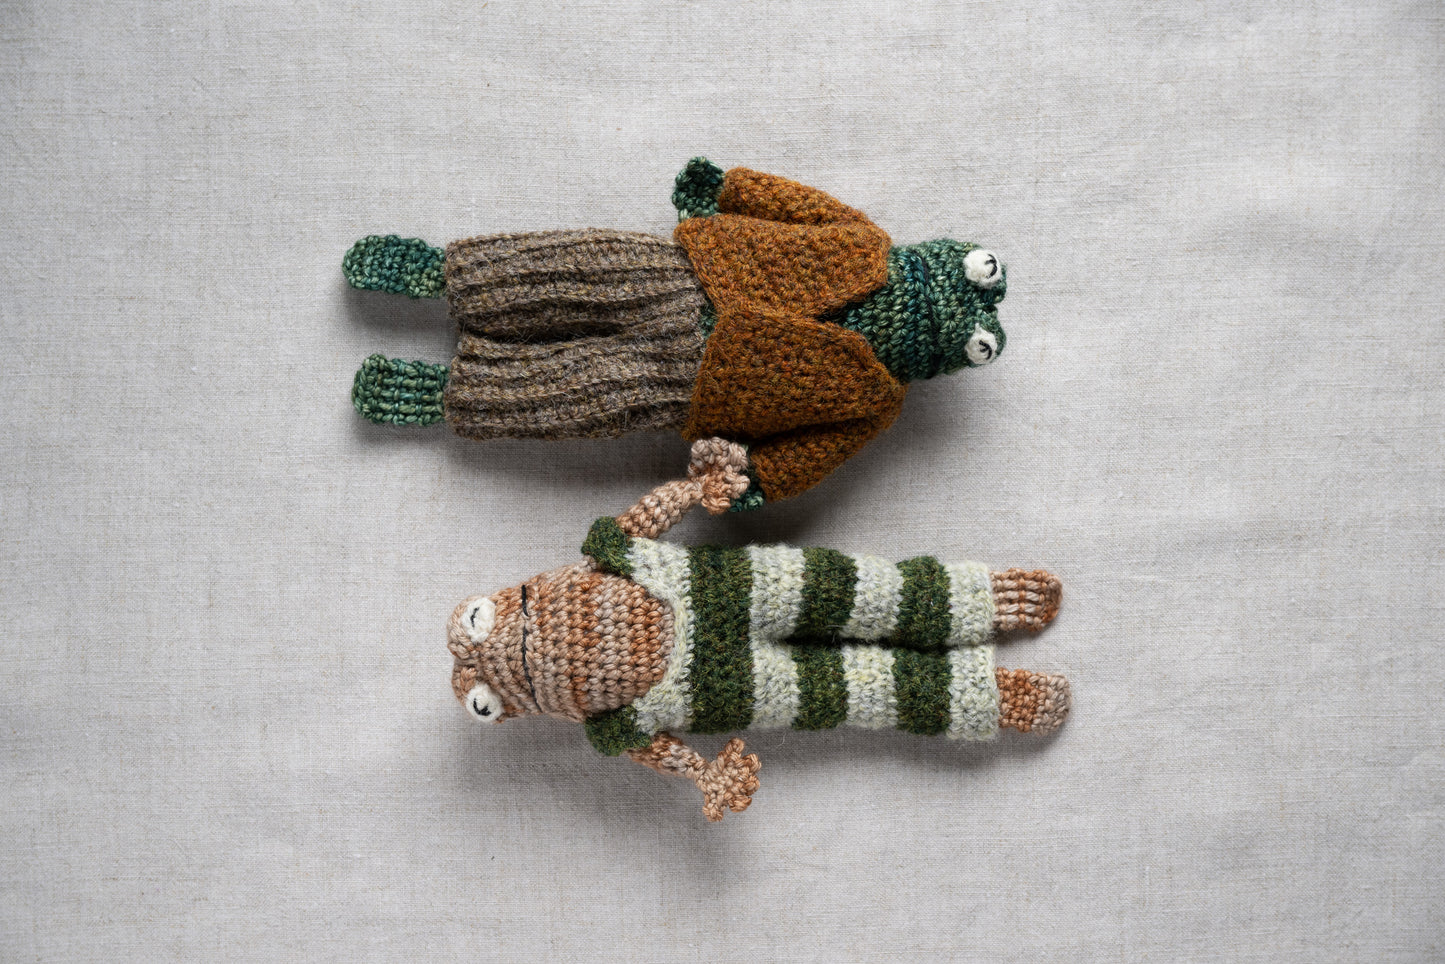 Frog and Toad from Arnold Lobel's original book.  Hand kitted or crocheted.